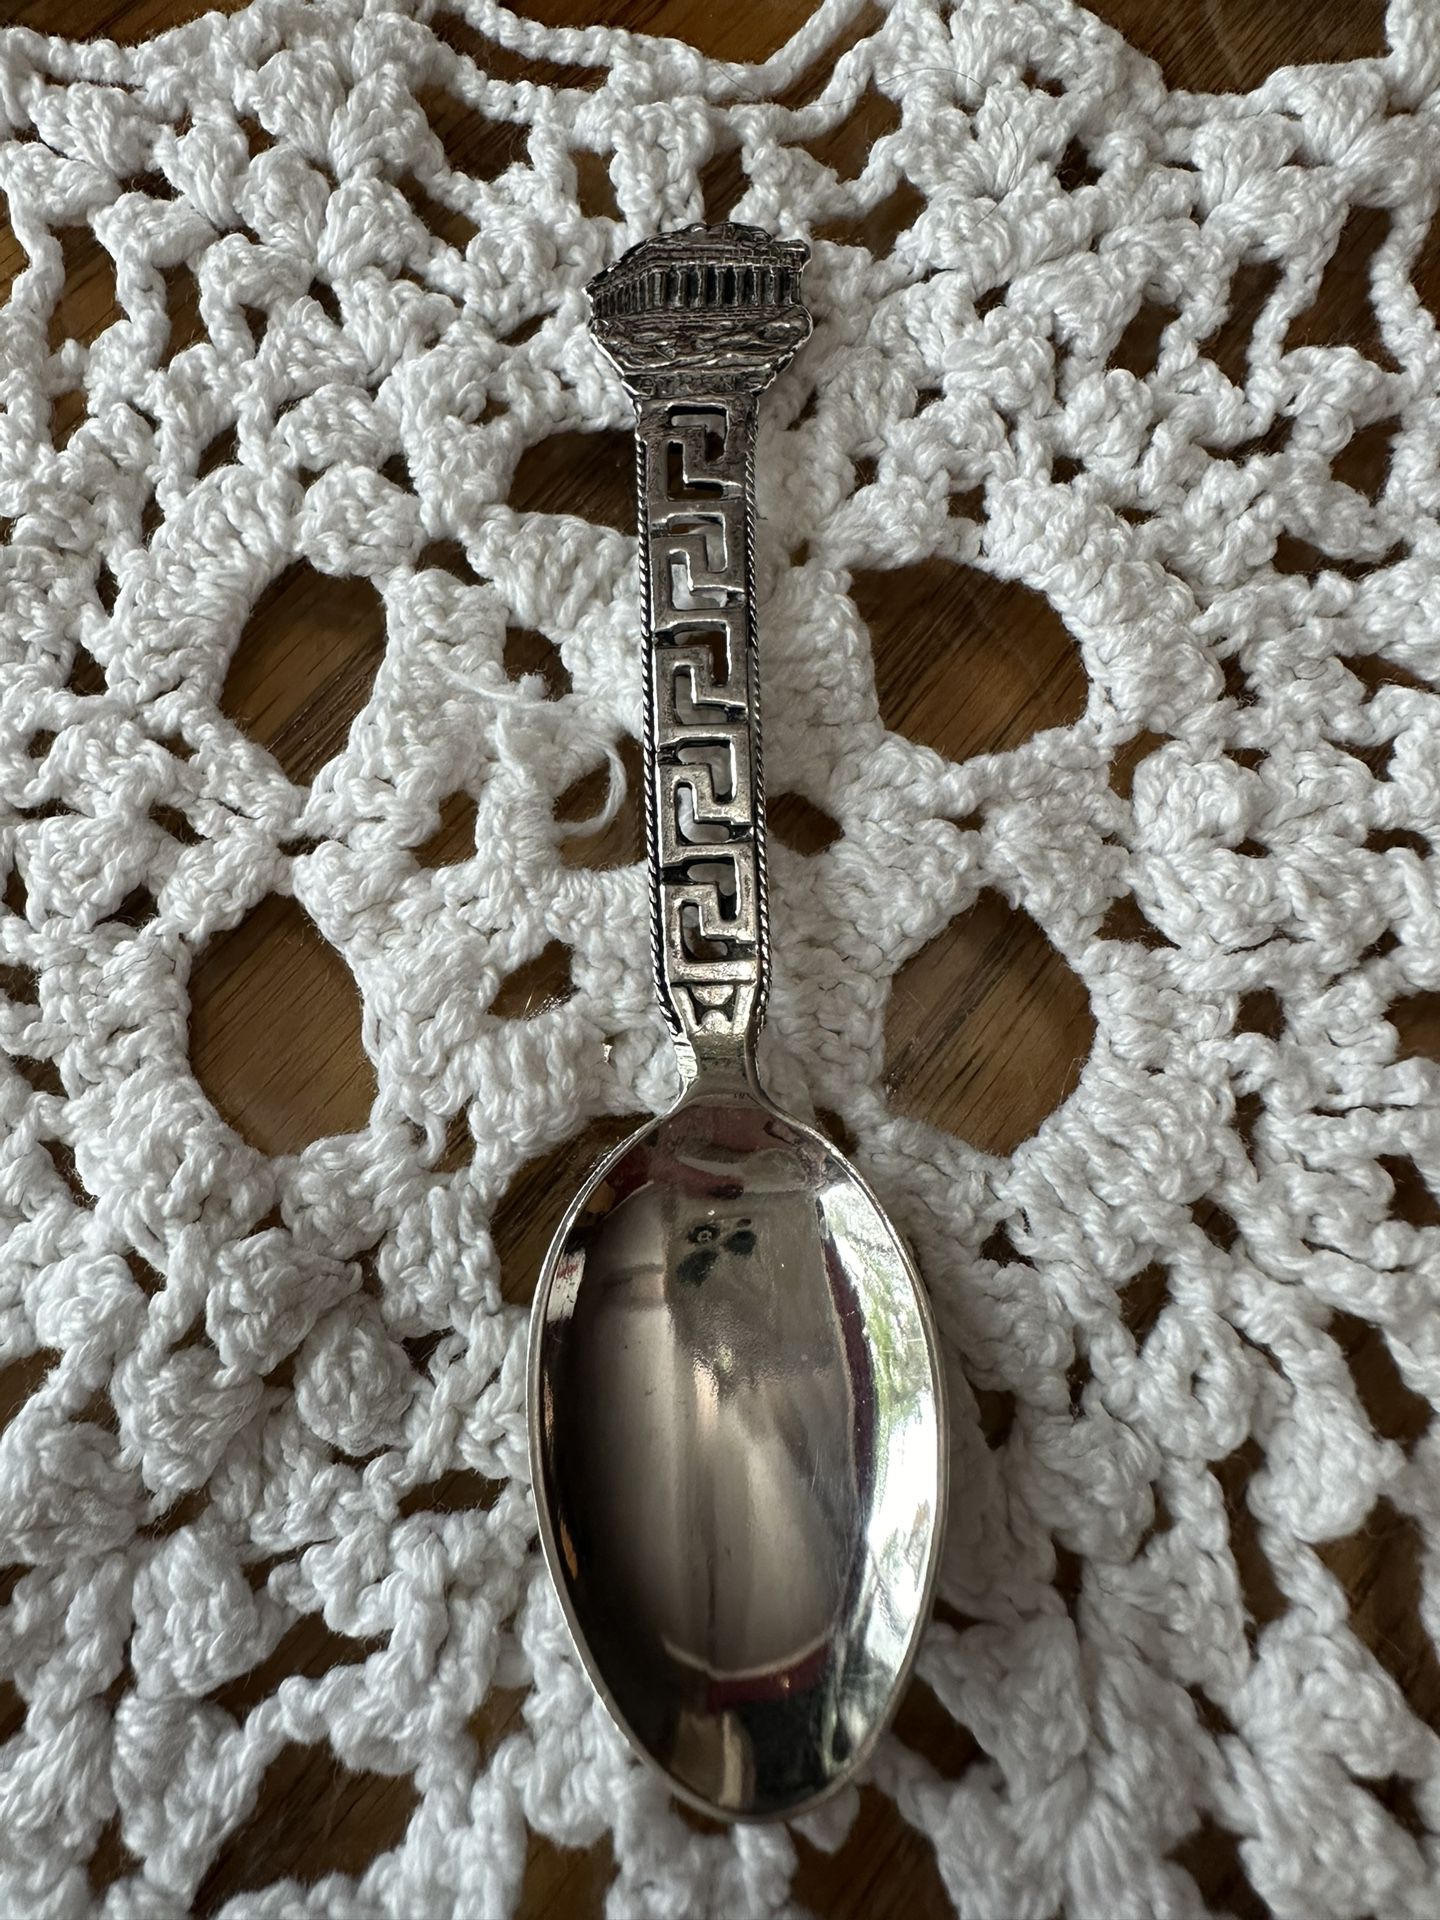 Silver Plated Spoon From Athens, Greece With A Picture Of The Parthenon On The End